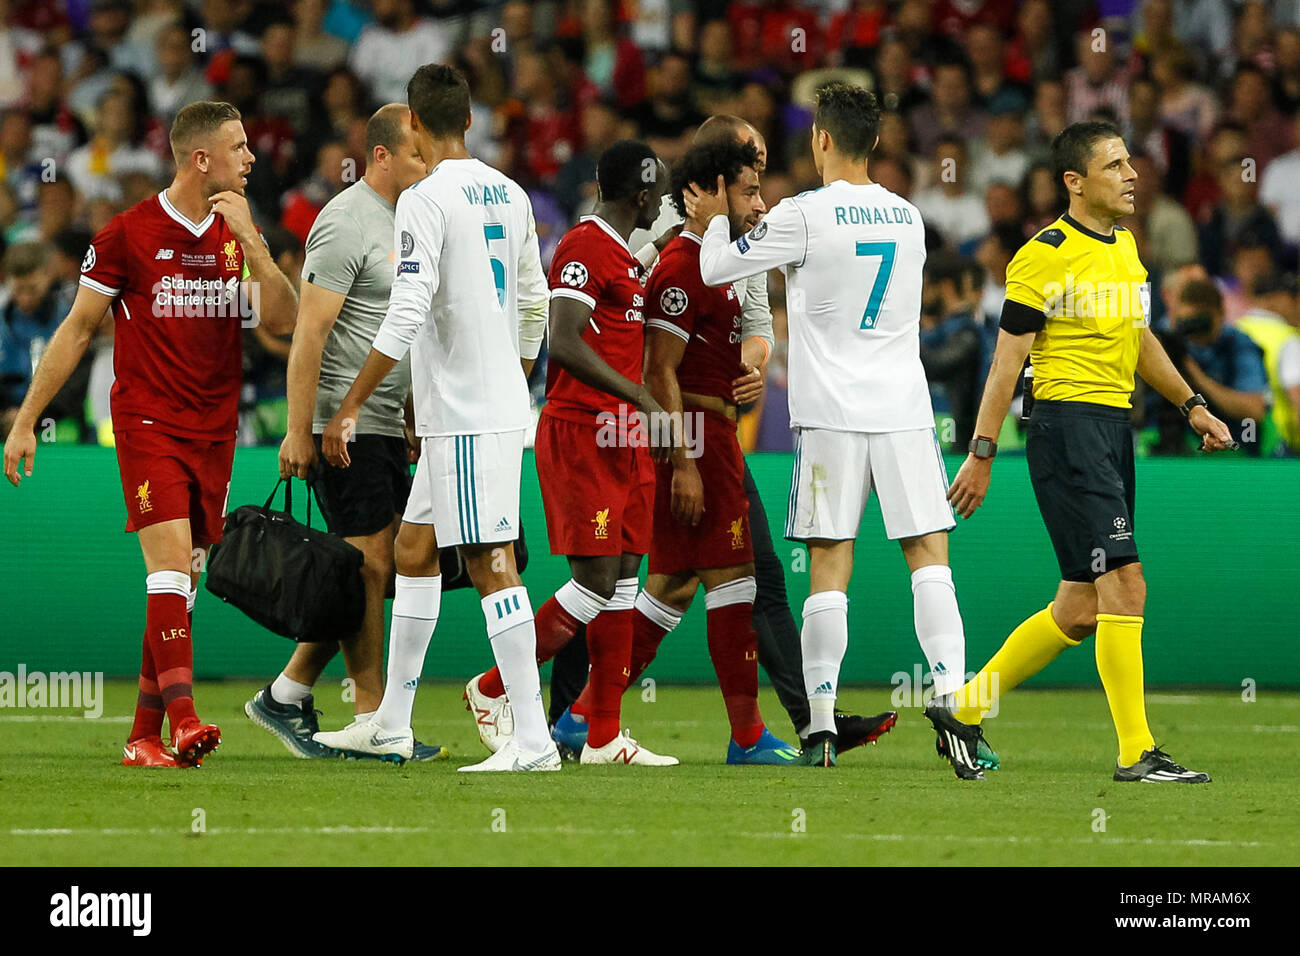 Kiev, Ukraine, 26 May 2018. Cristiano Ronaldo of Real Madrid consoles  Mohamed Salah of Liverpool as he is substituted during the UEFA Champions  League Final match between Real Madrid and Liverpool at